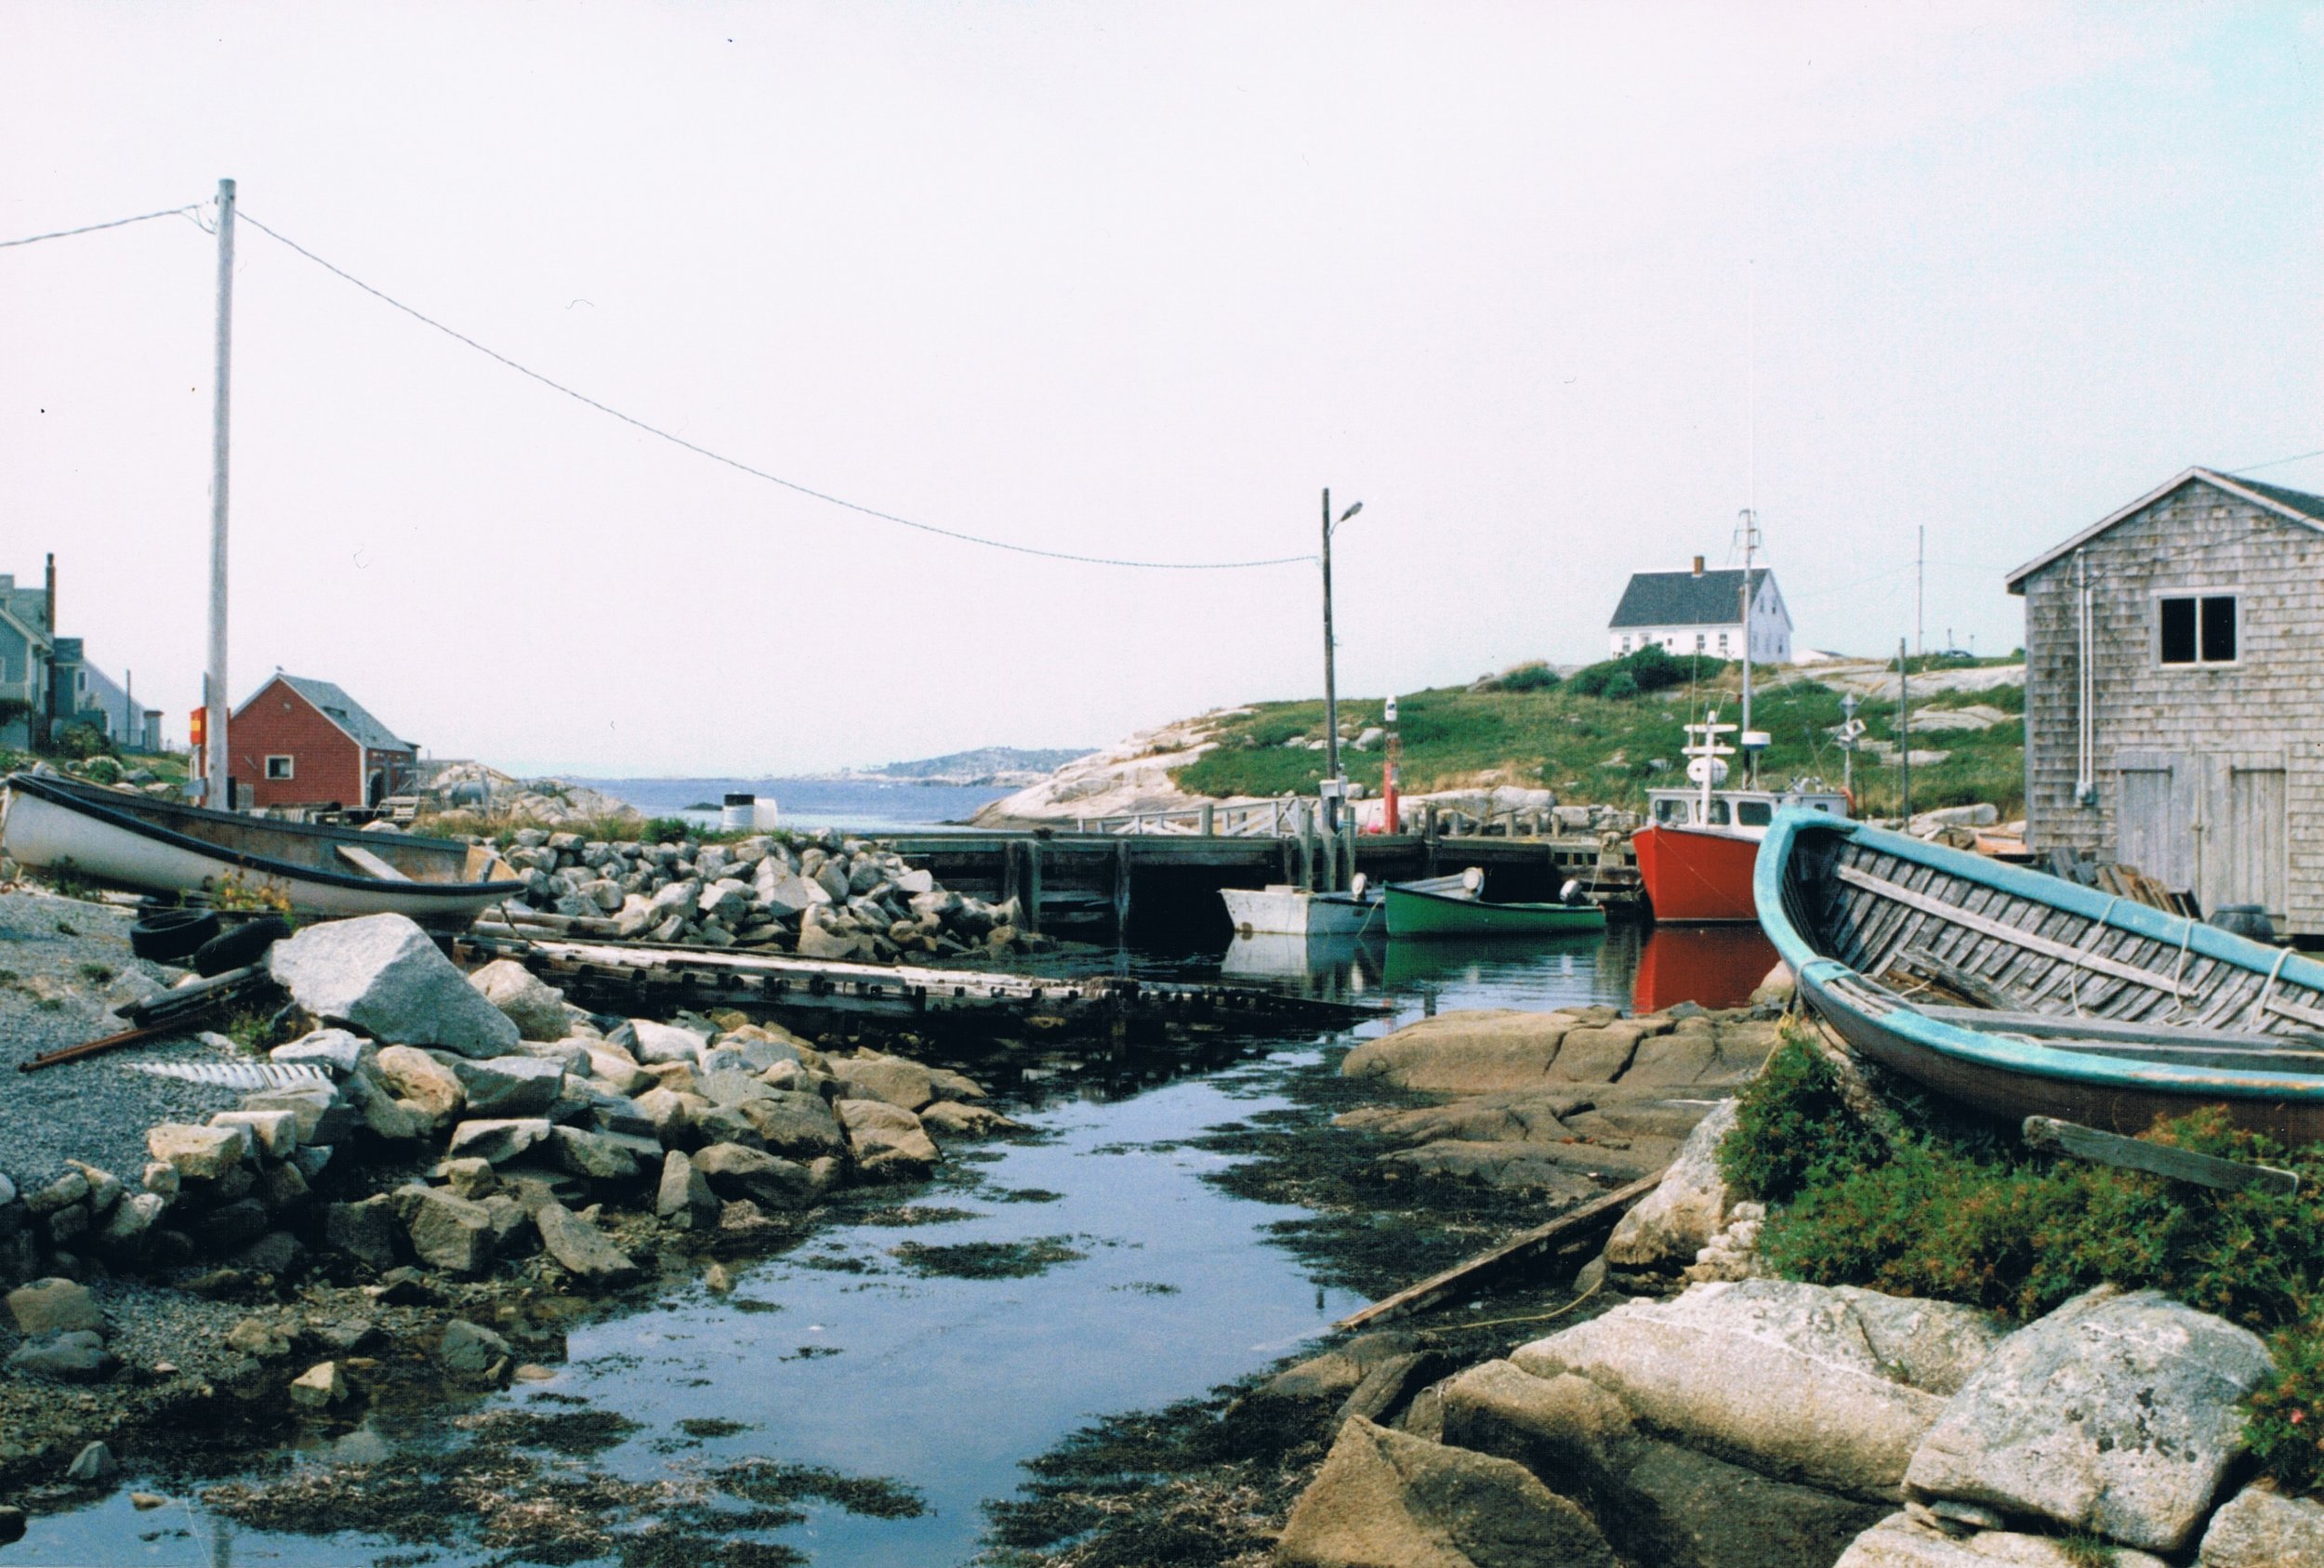 Fishermen from Peggy's Cove helped  in the aftermath